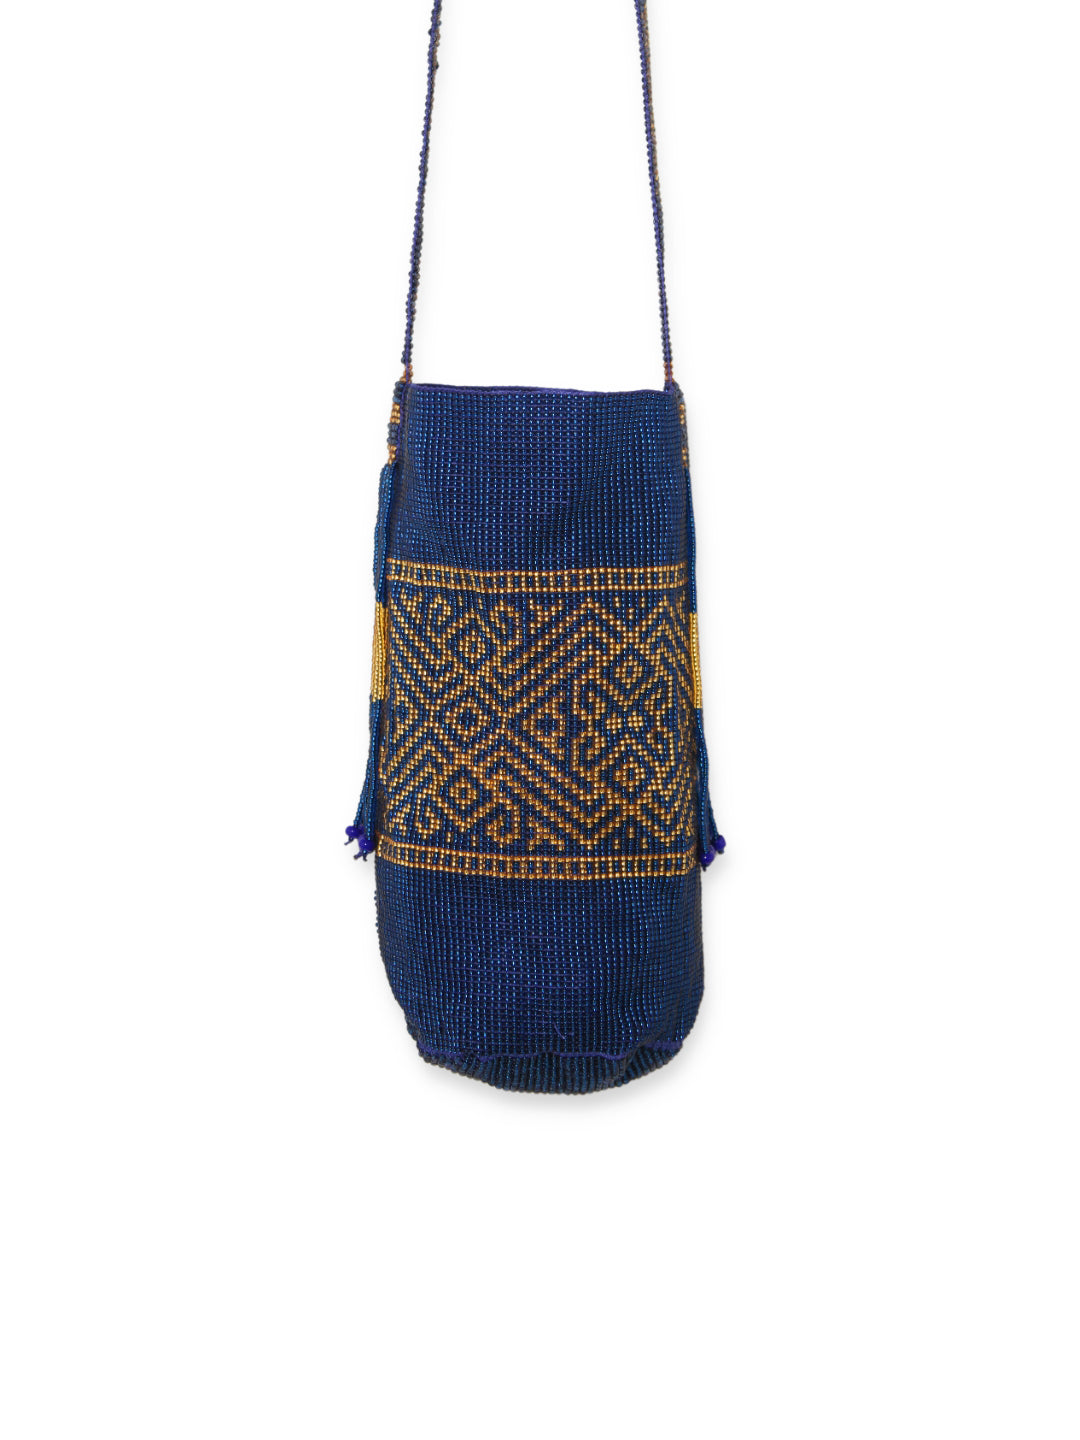 This Mochila bag is entirely hand-woven with glass beads by artisans of the Kamsa tribe on the southern rain forest of Colombia where culture is one of their biggest treasures. Each of these beaded Mochila represents a special belief, for instance, here is represented the ant, symbol of work and harmony to work. Black with gold decorations 100% glass beads Beaded drawstring closure. Evening bag.